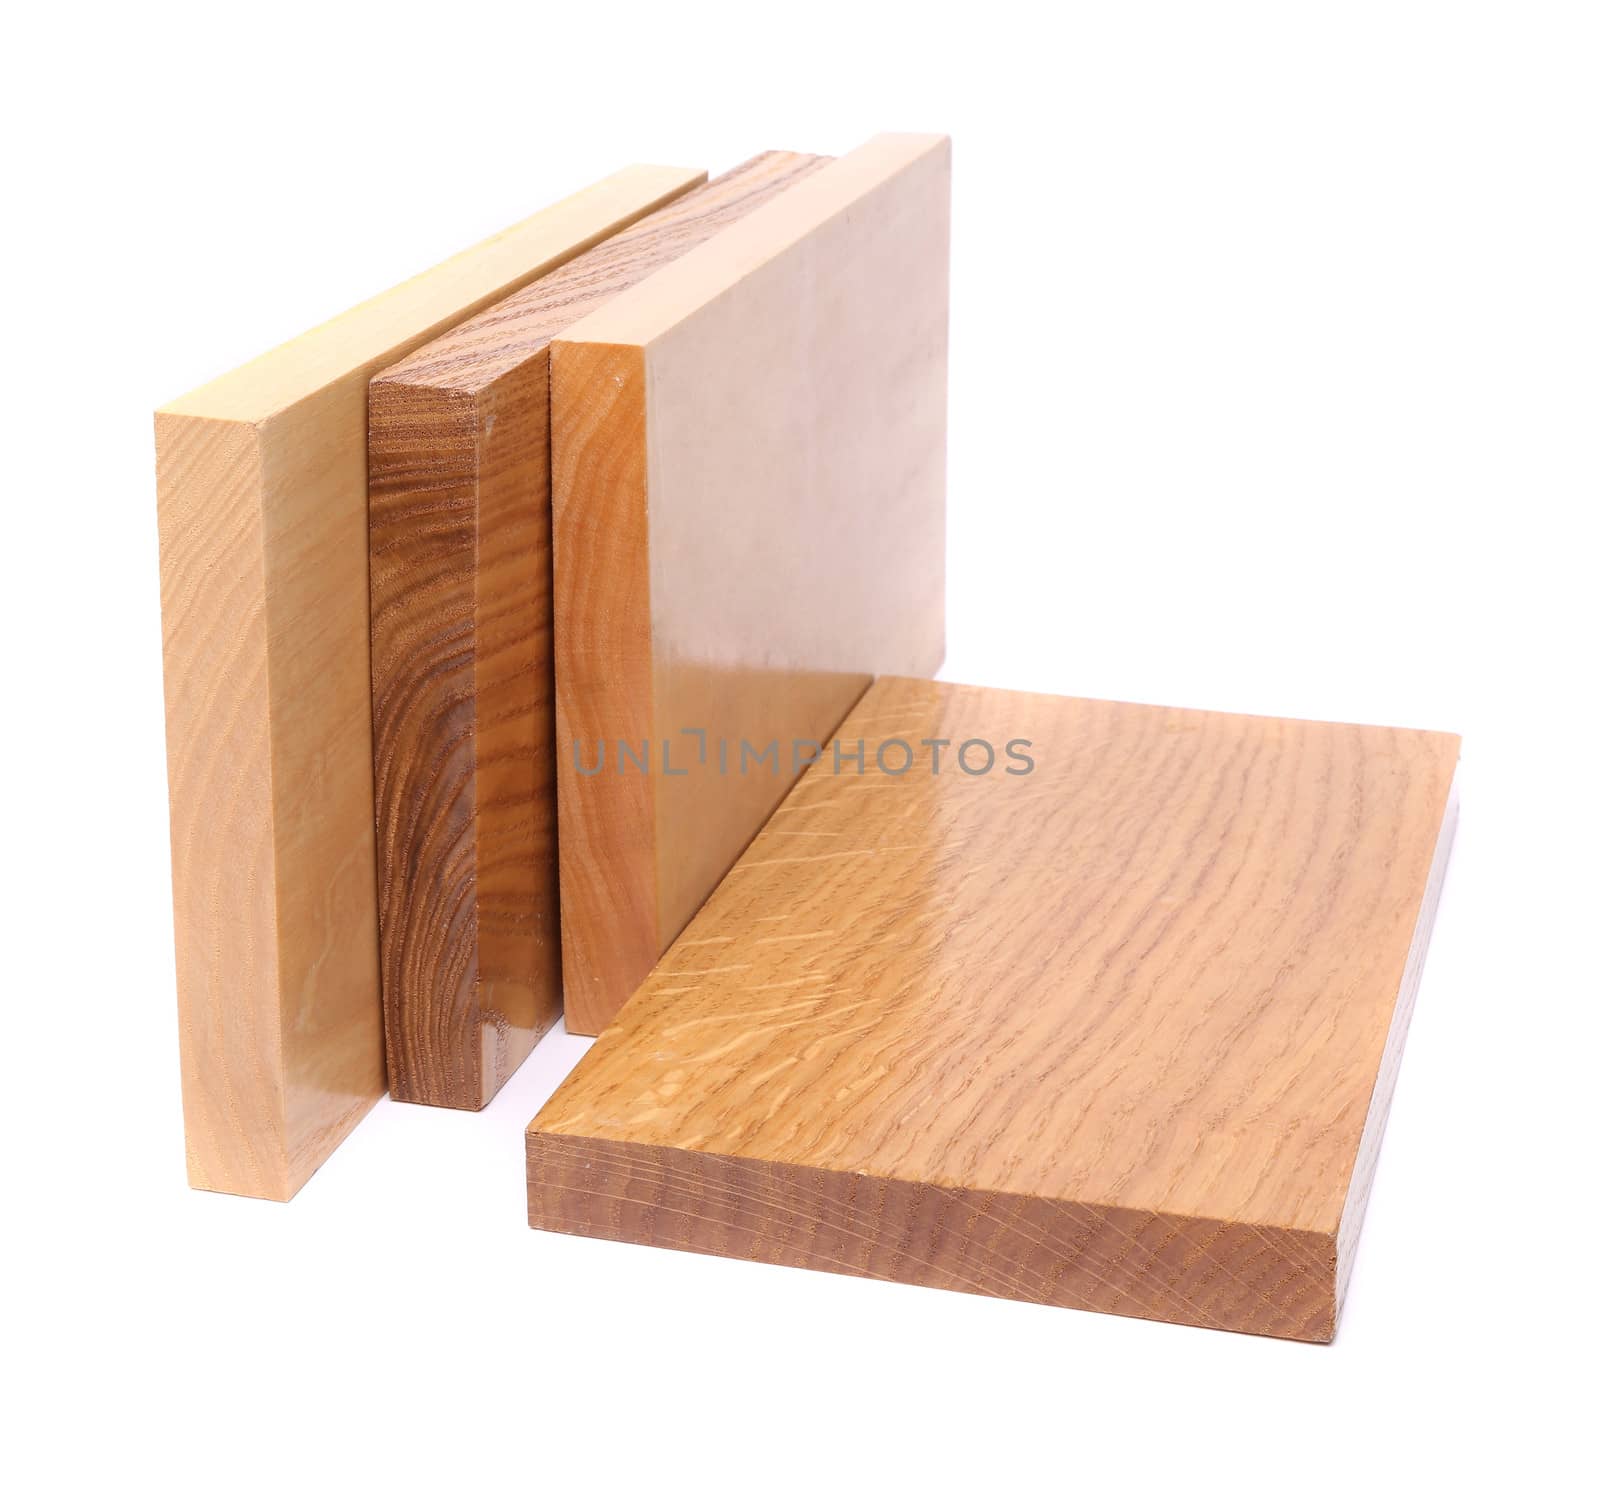 Four wooden plank close-up are located on the white background